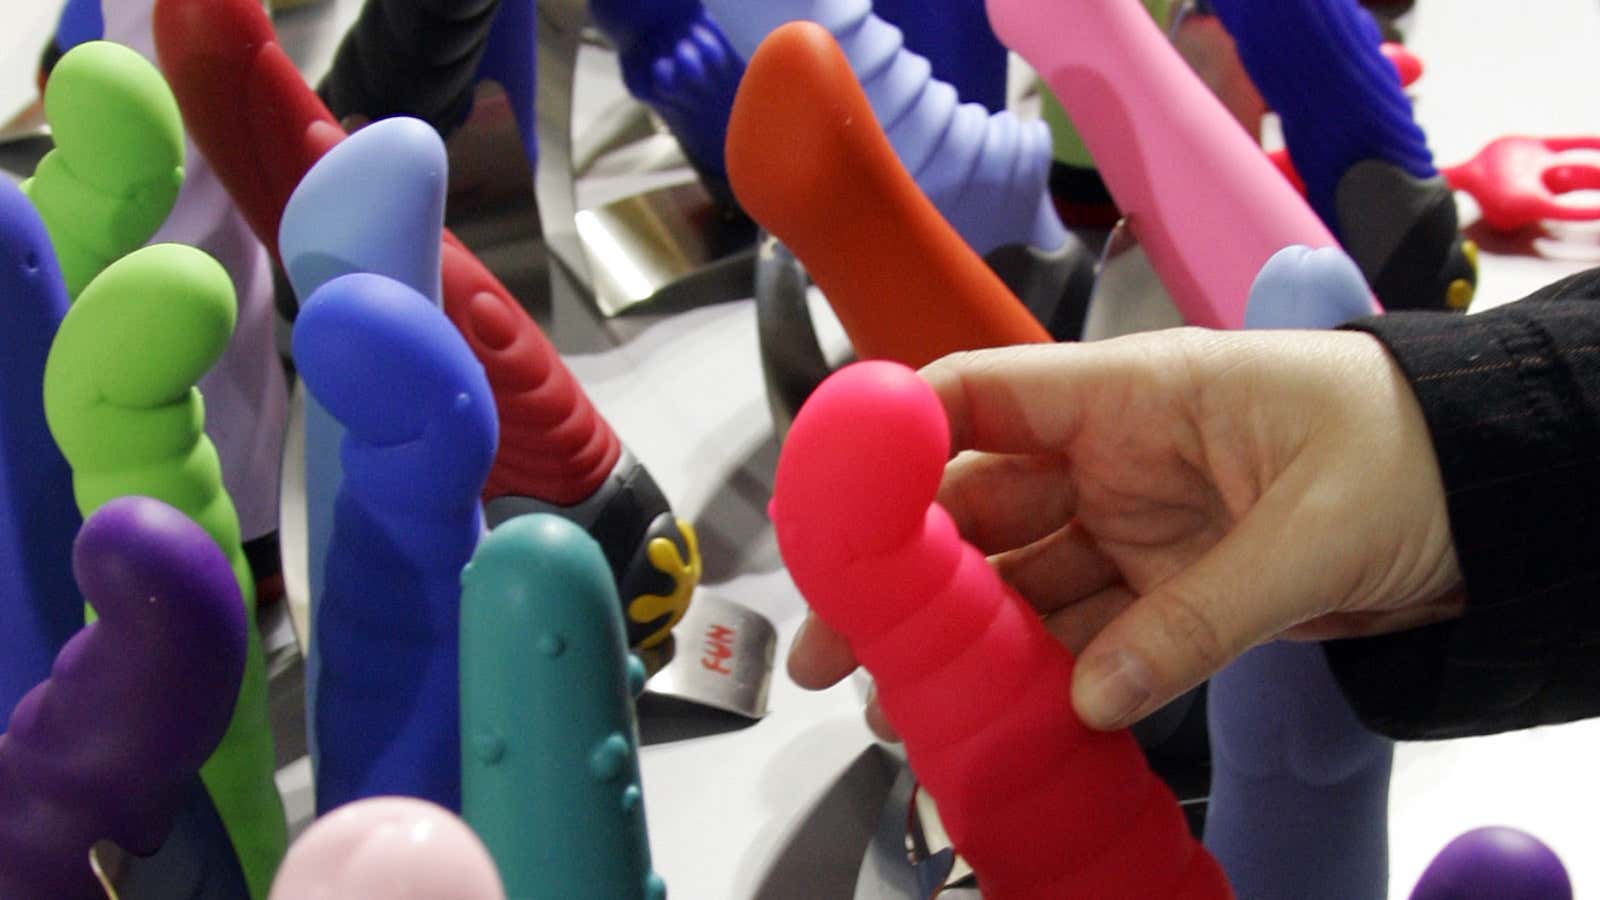 Sex Toys From The 1800s - Dildos were actually pioneered by one of the world's best ventriloquists